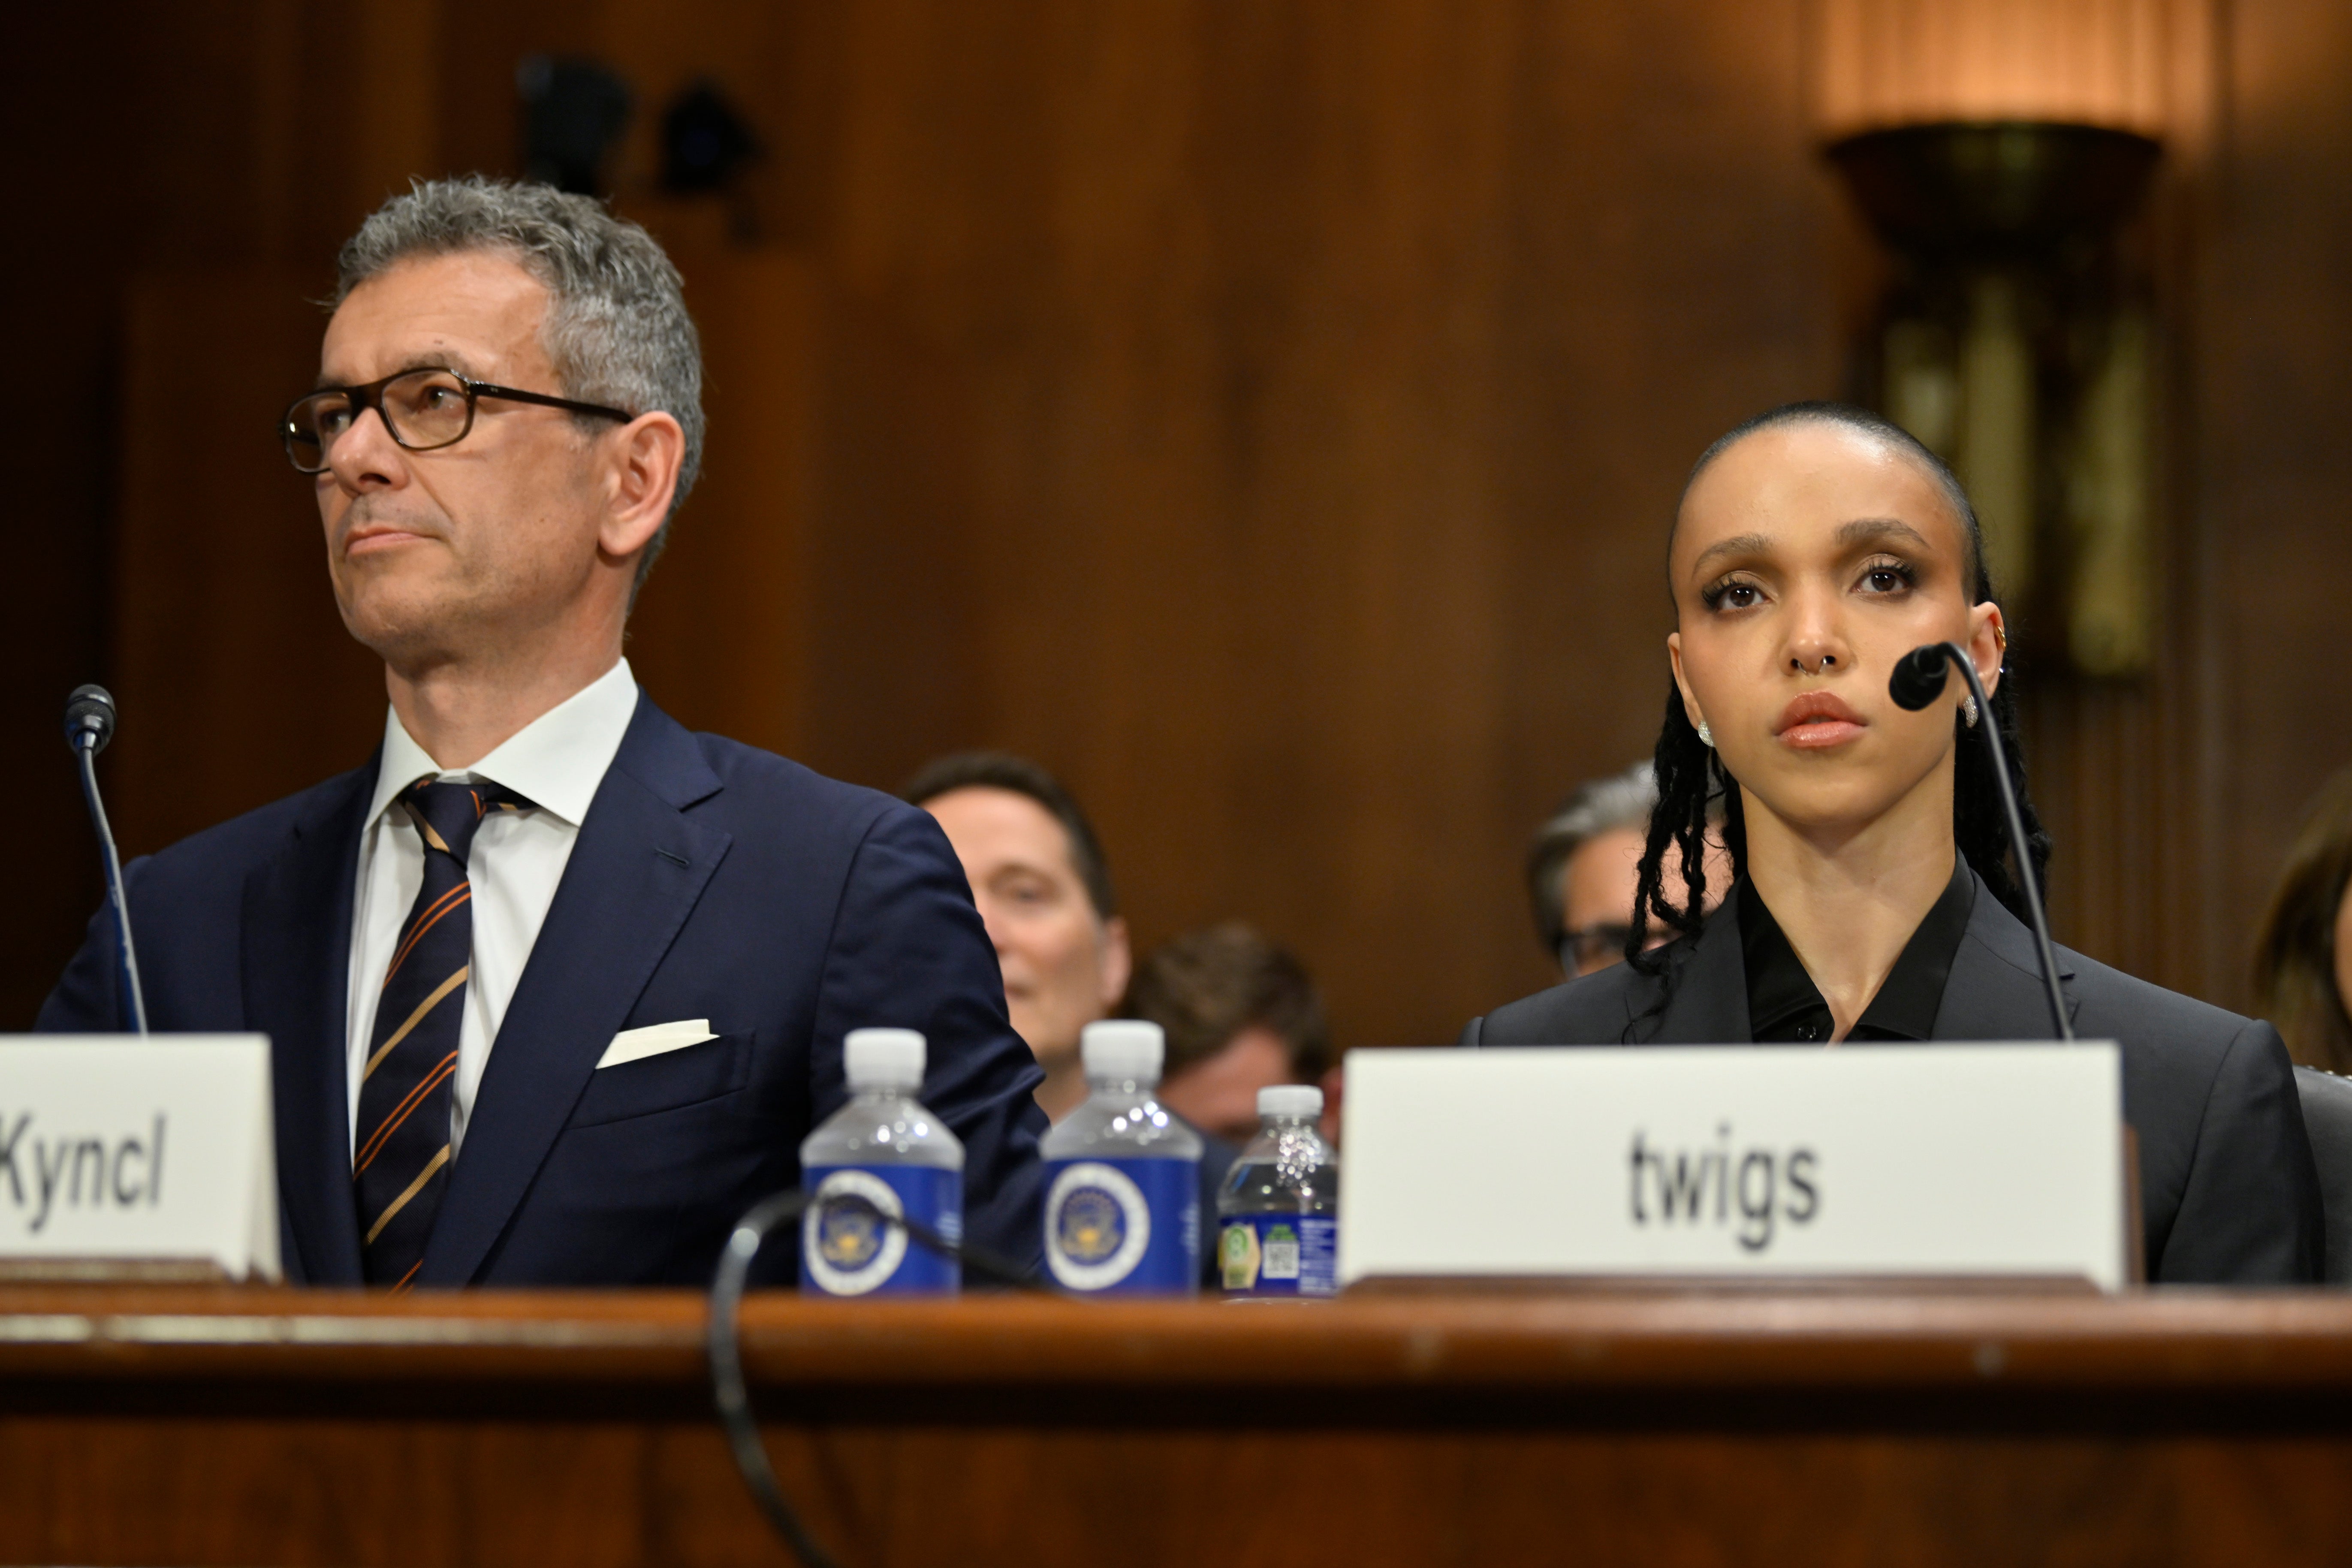 Warner Music Group CEO Robert Kyncl and singer/actor FKA twigs attend congressional testimony for the NO FAKES Act in Washington, DC